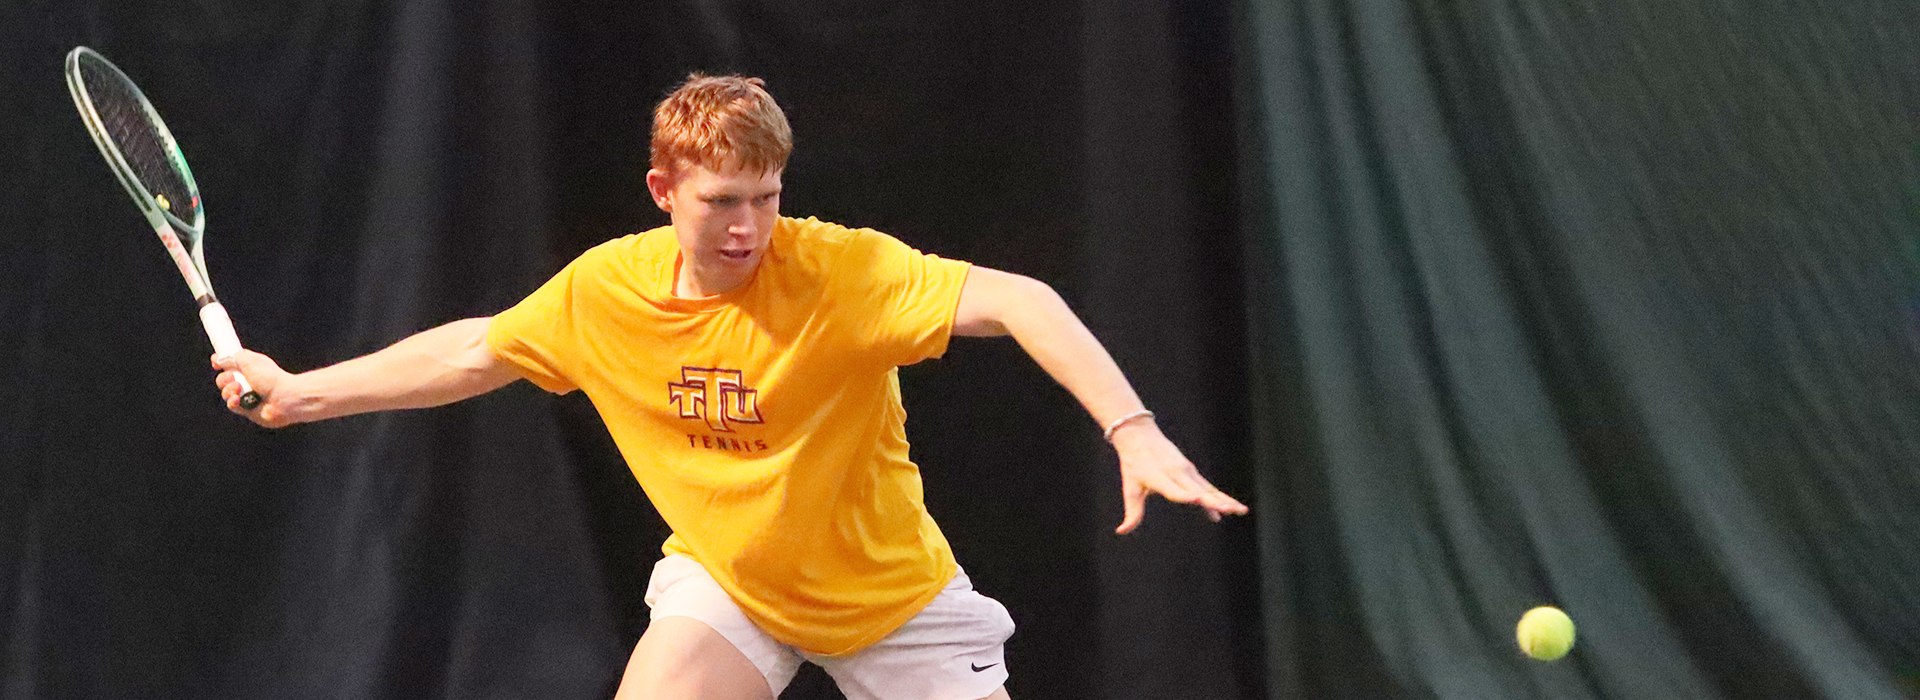 Tech tennis back in action with Thursday meeting at UAB, Saturday match at No. 21 Alabama